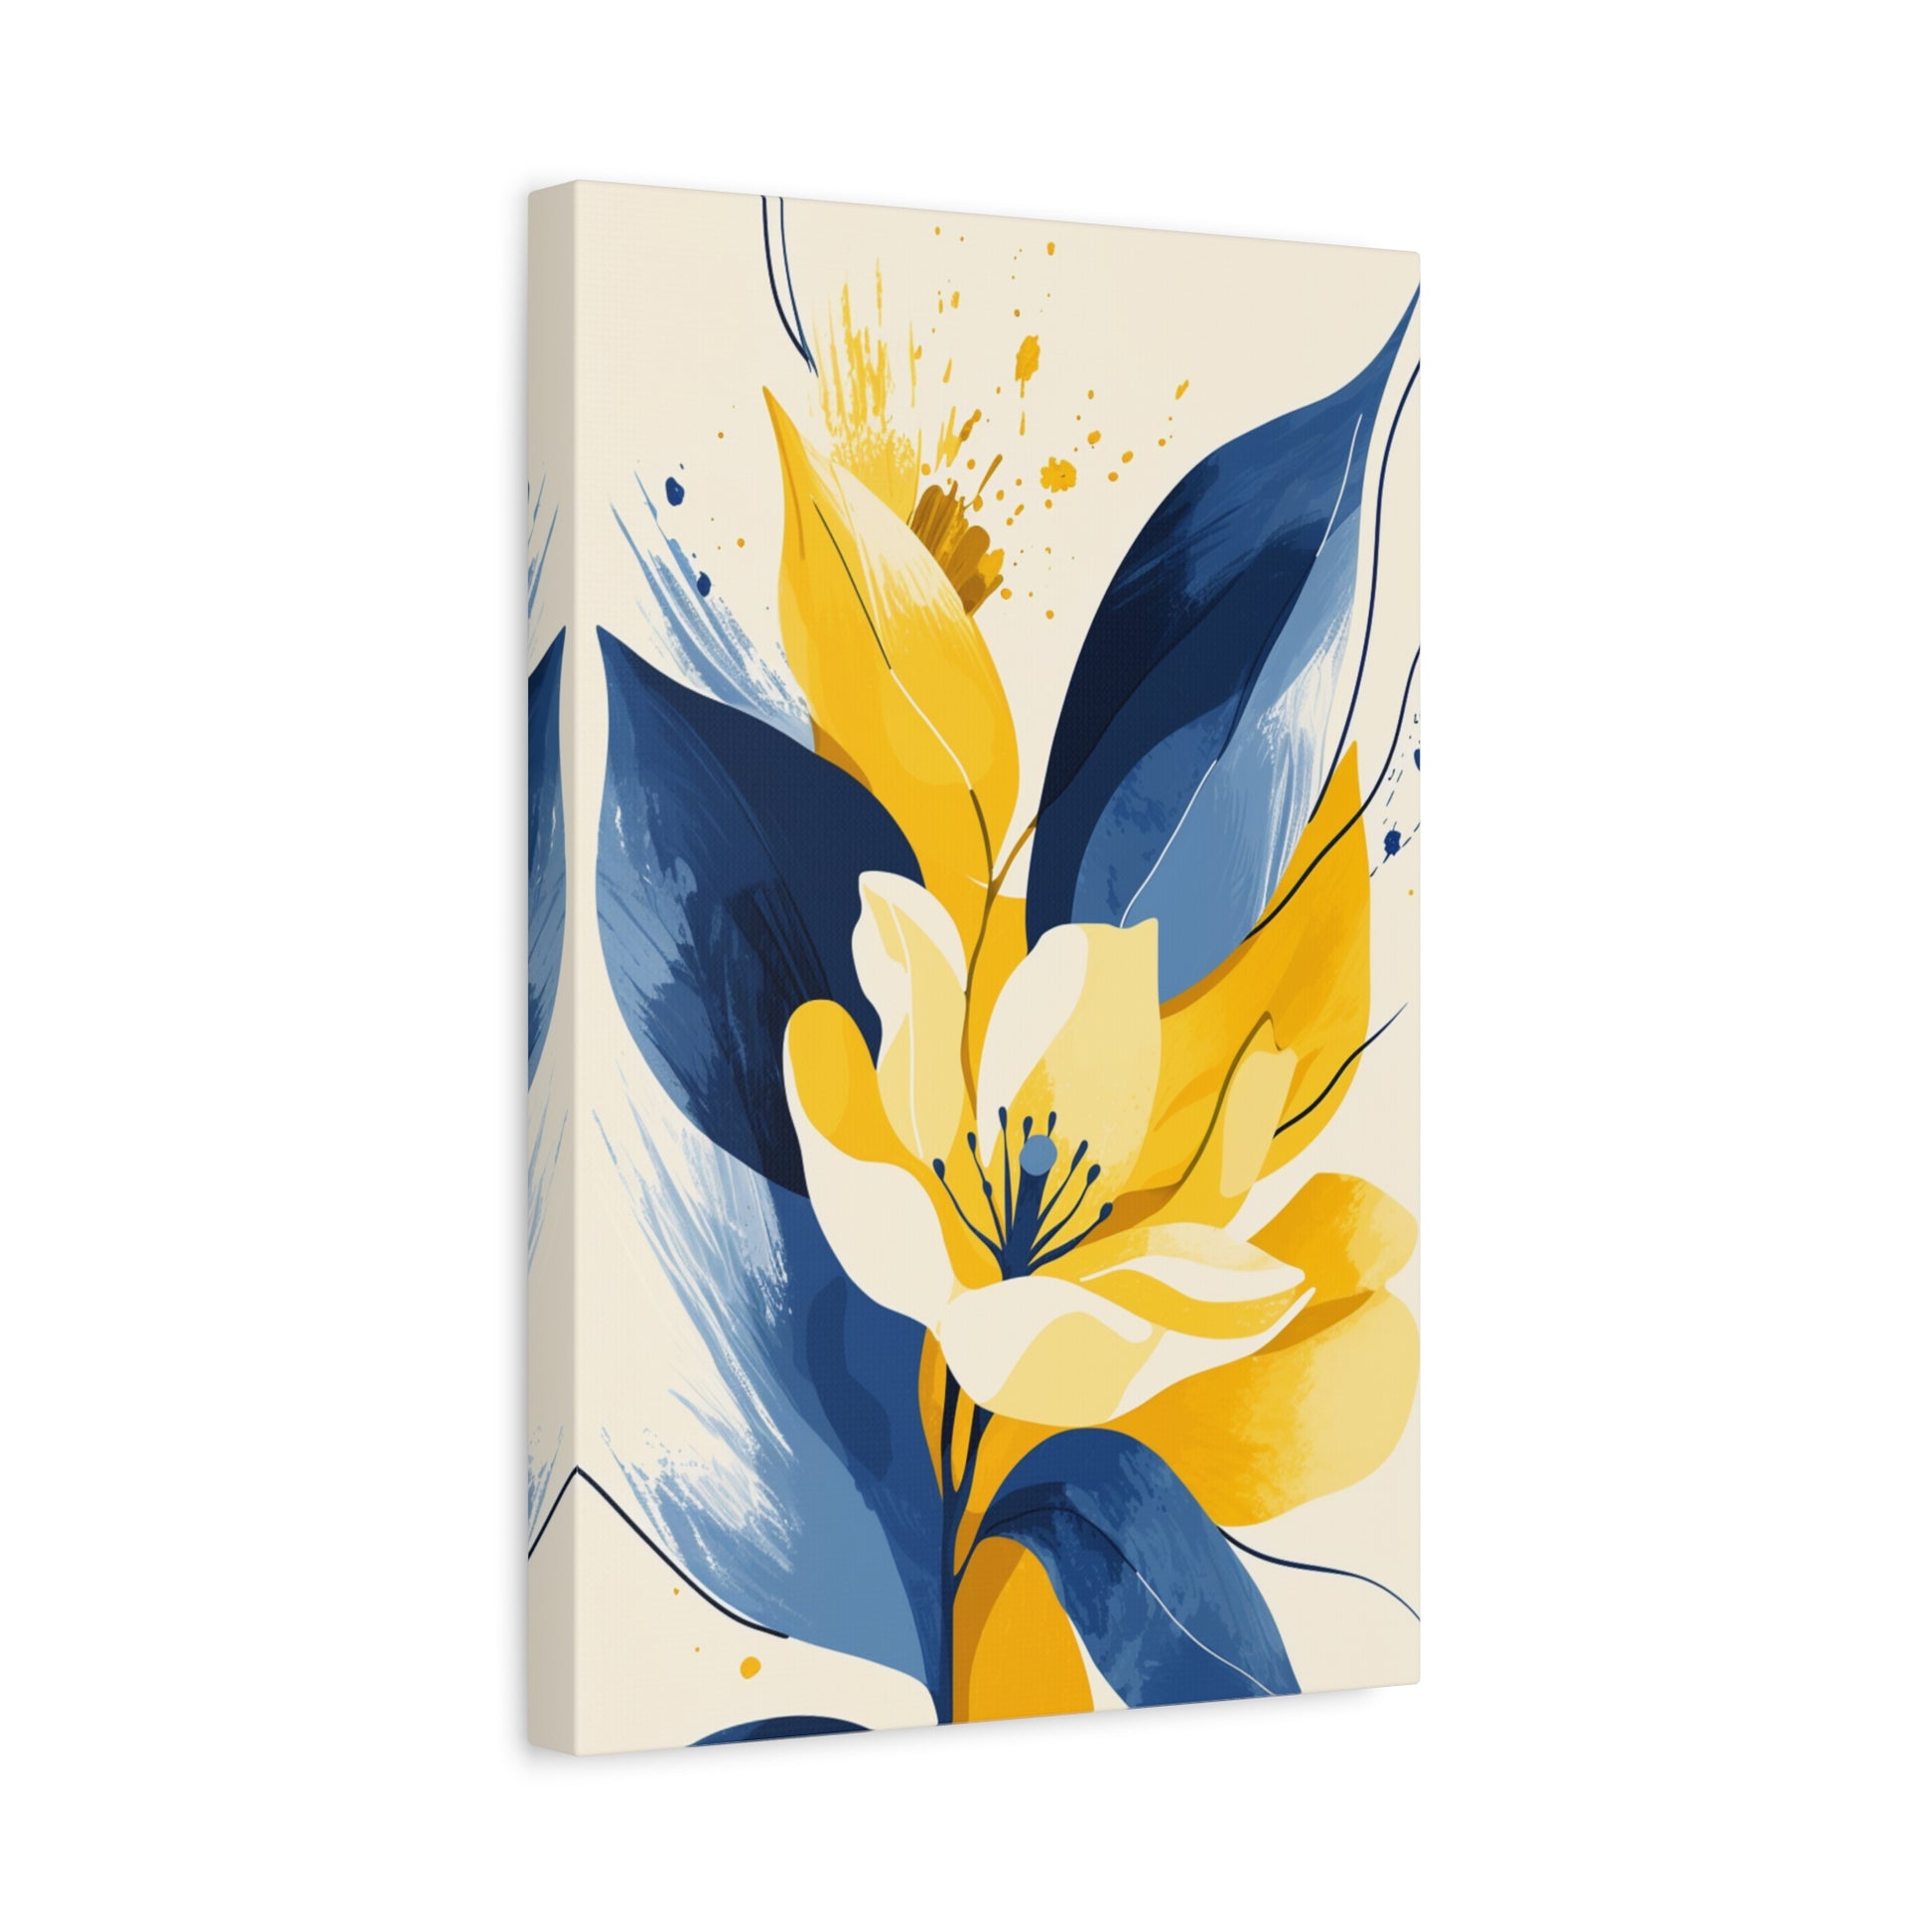 Indigo Spring (Canvas)Upgrade your tech with the latest gadgets. Shop now for innovative products designed to enhance your digital lifestyle. Fast shipping!RimaGallery